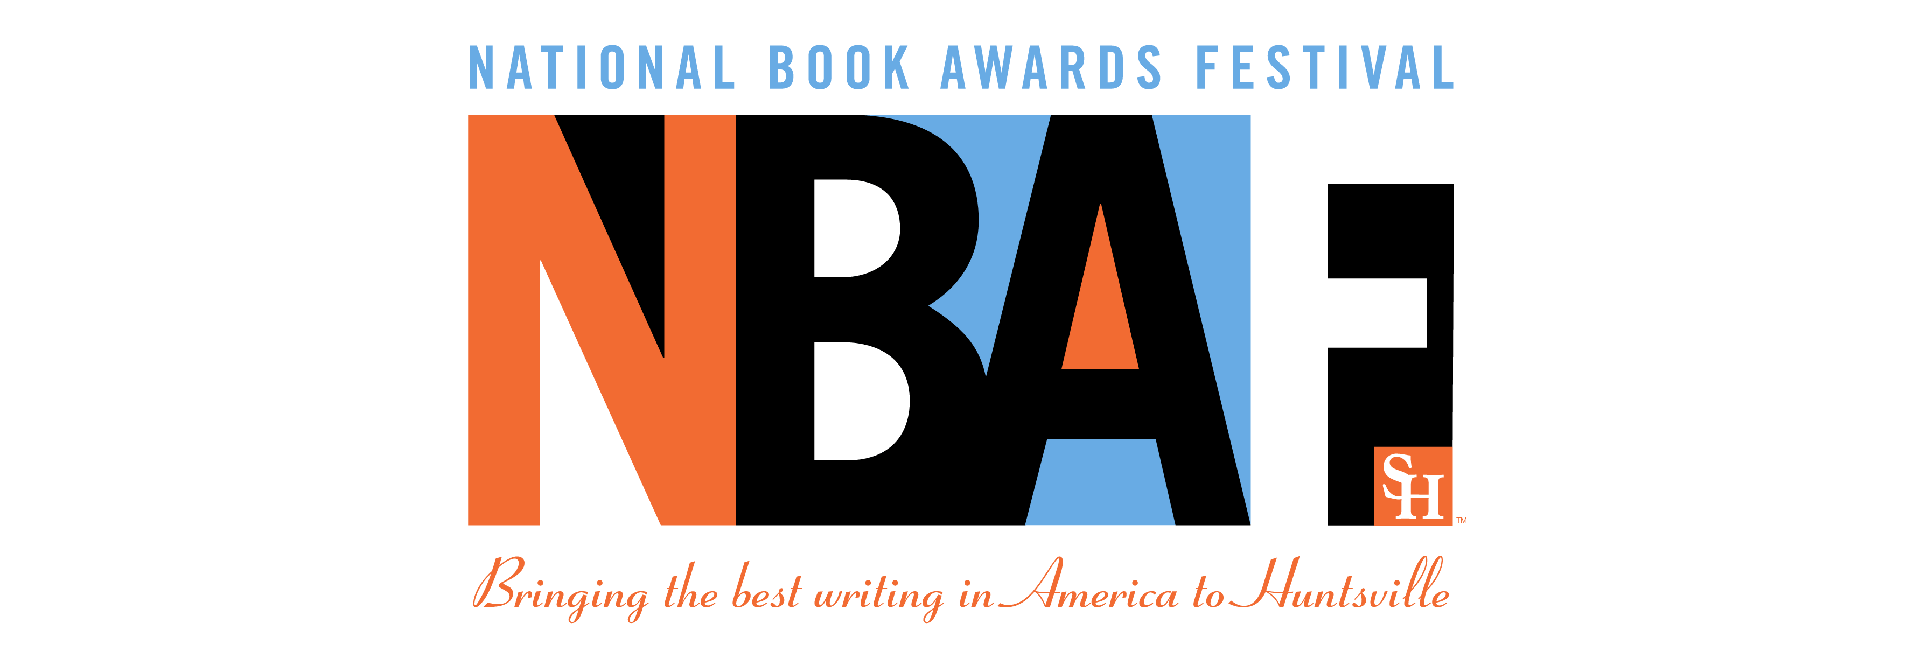 National Book Awards Festival - Bringing the best writing in America to Huntsville